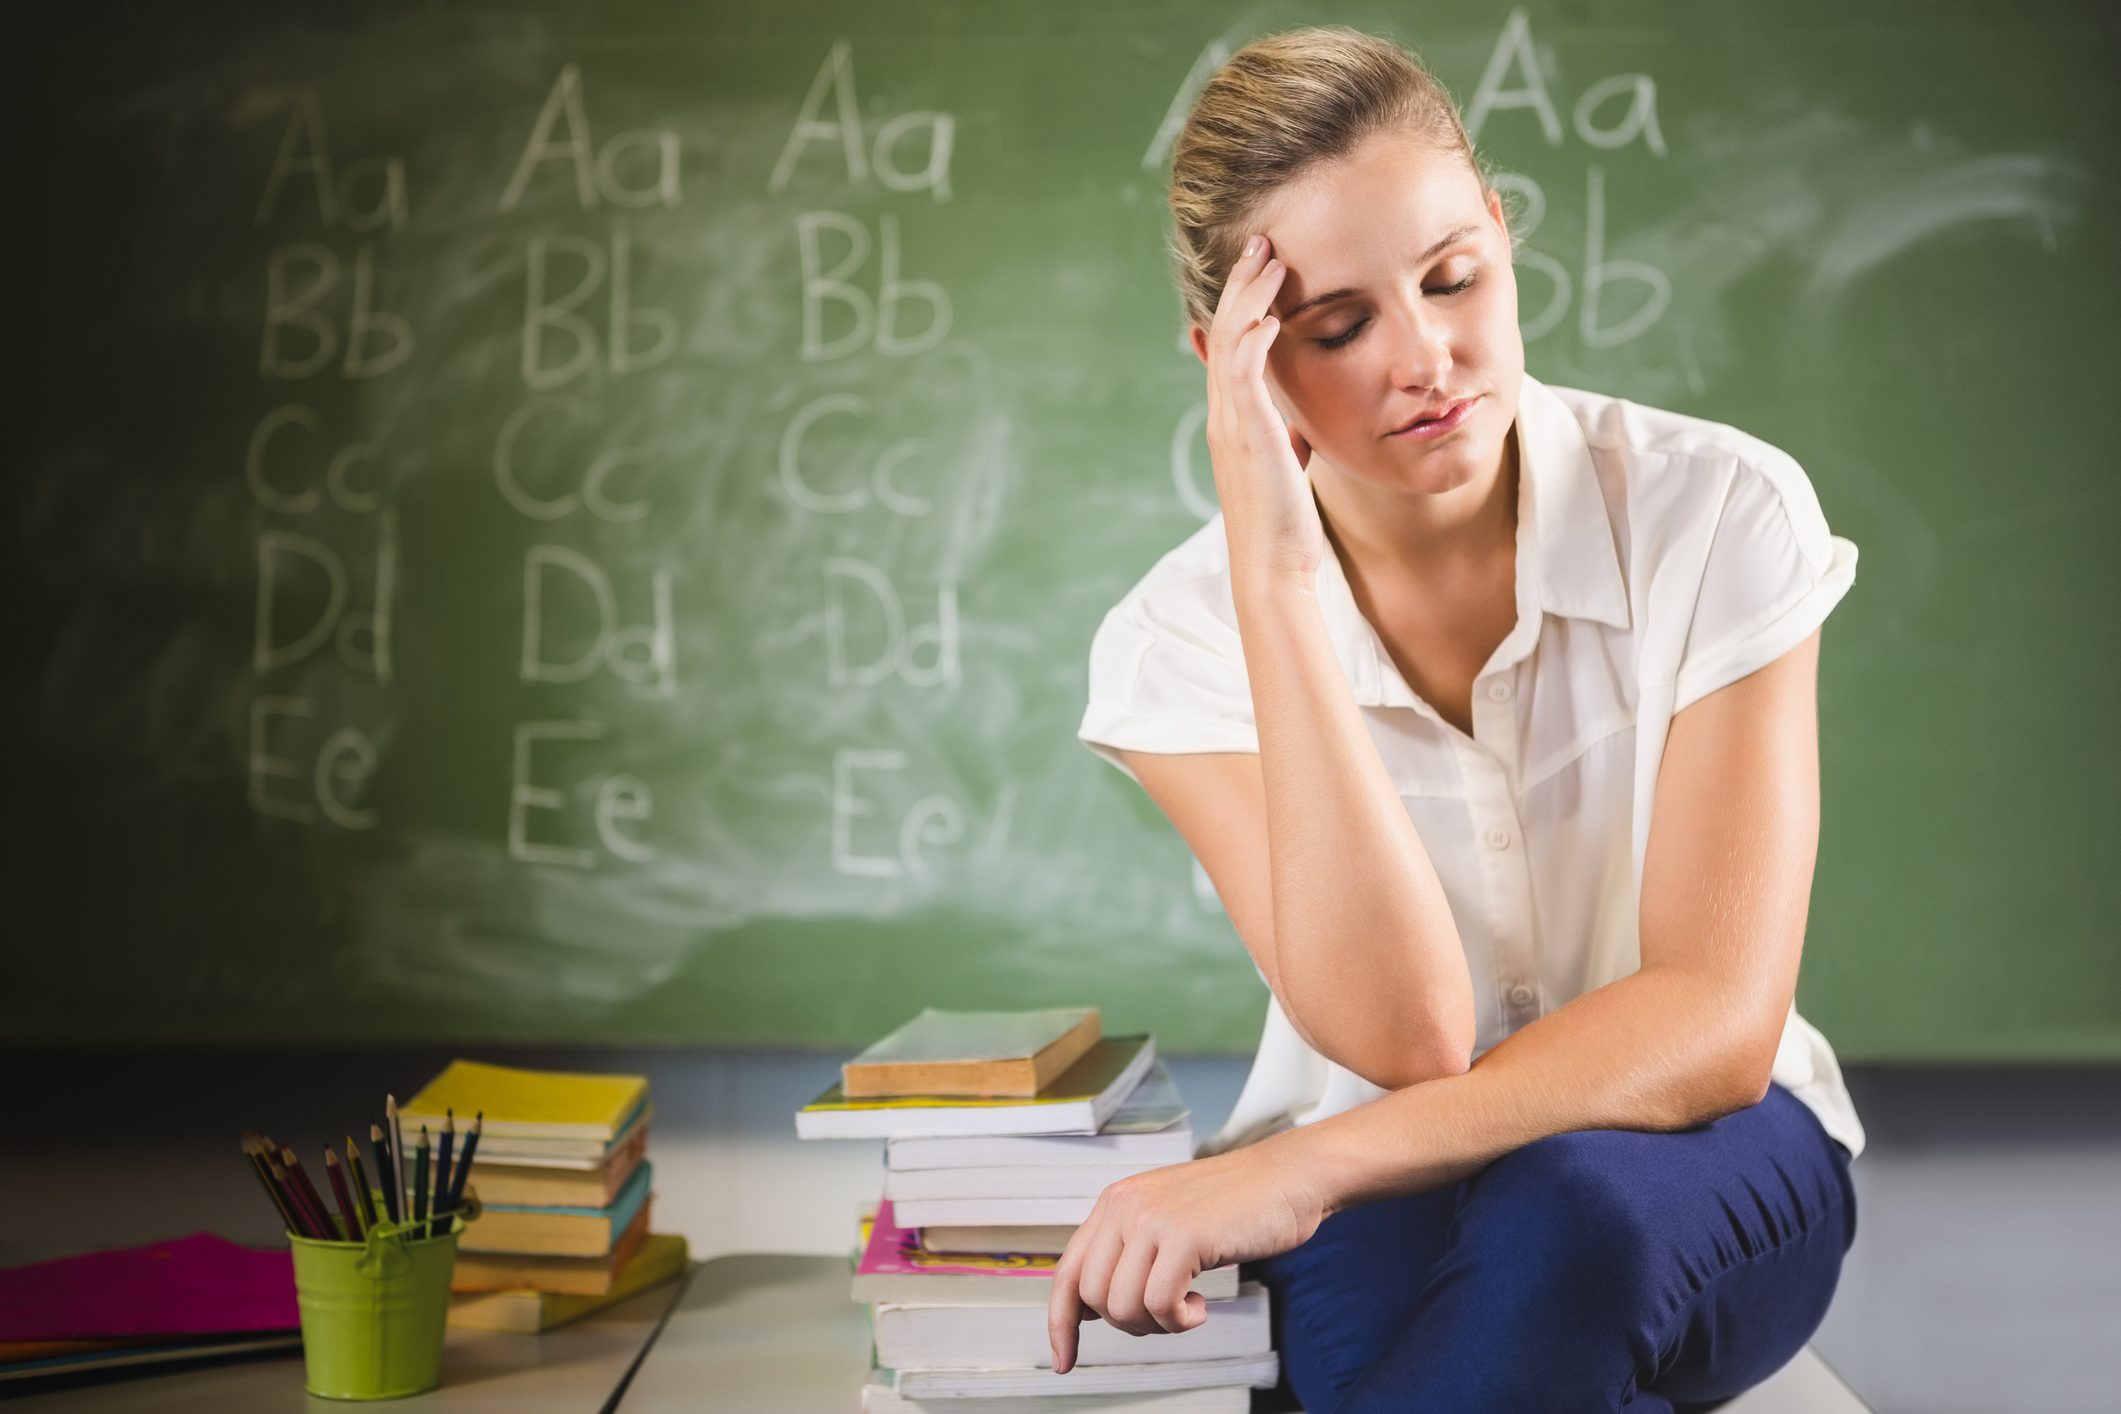 ensed school teacher sitting with hand on forehead in classroom at school